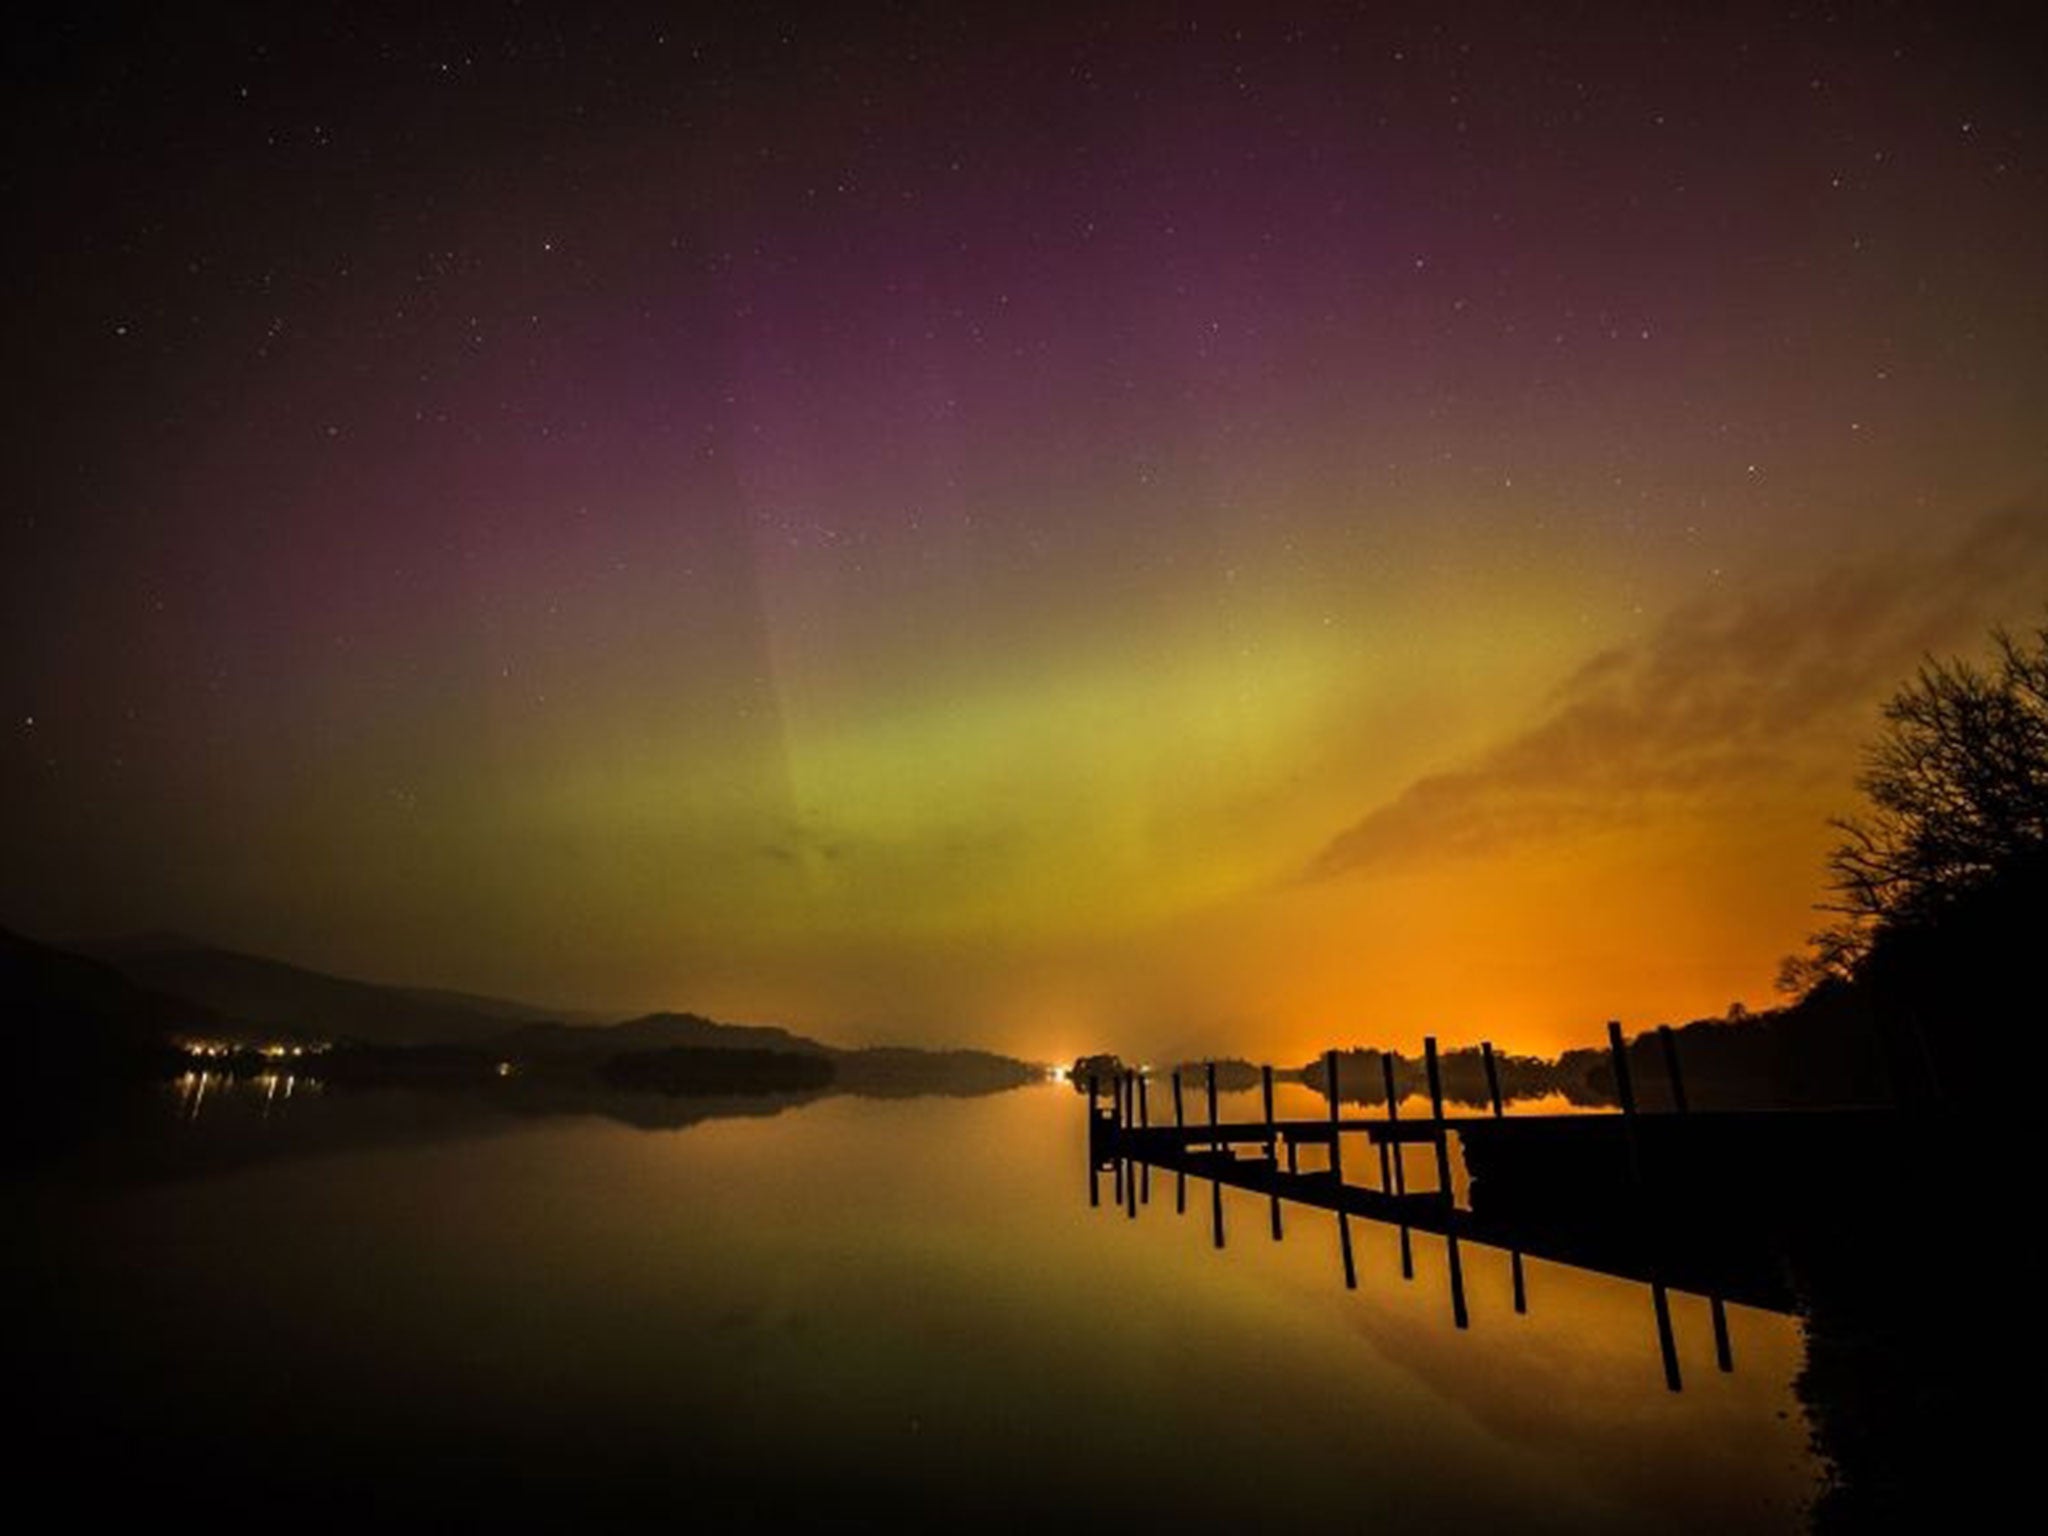 The aurora borealis, or the northern lights as they are commonly known, over Derwent water near Keswick in the Lake District.